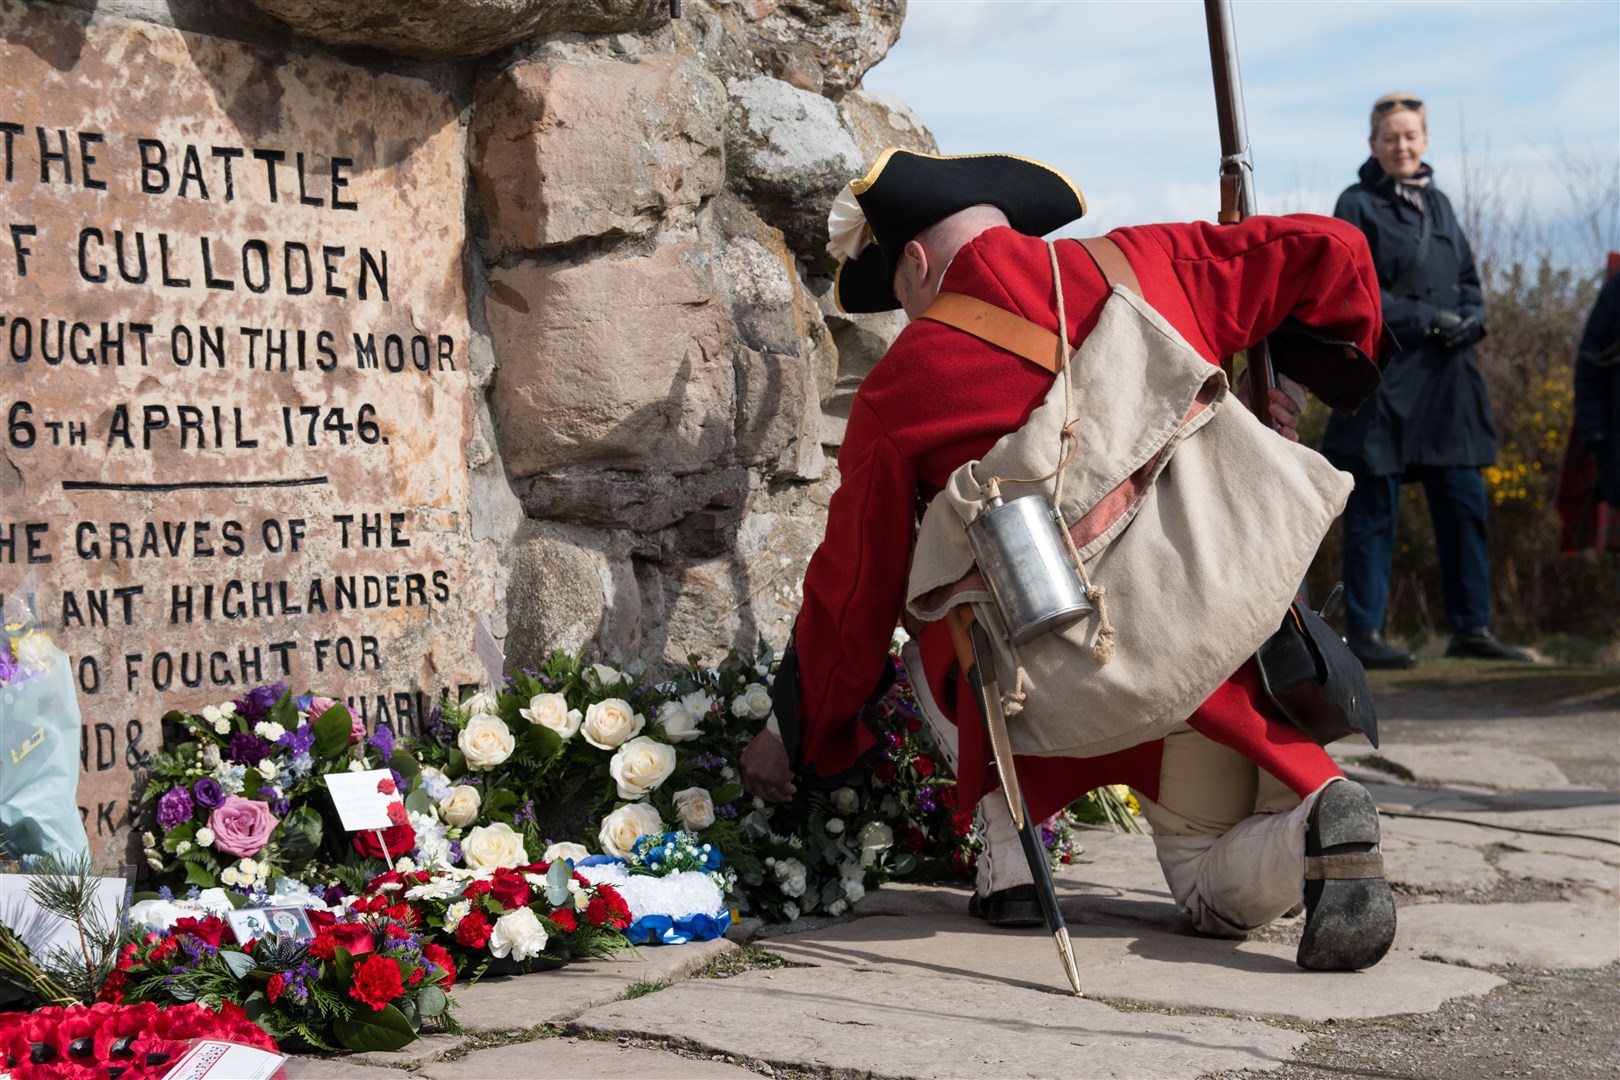 A man wearing the outfit of the Irish Piquets places at wreath at the battlefield cairn.